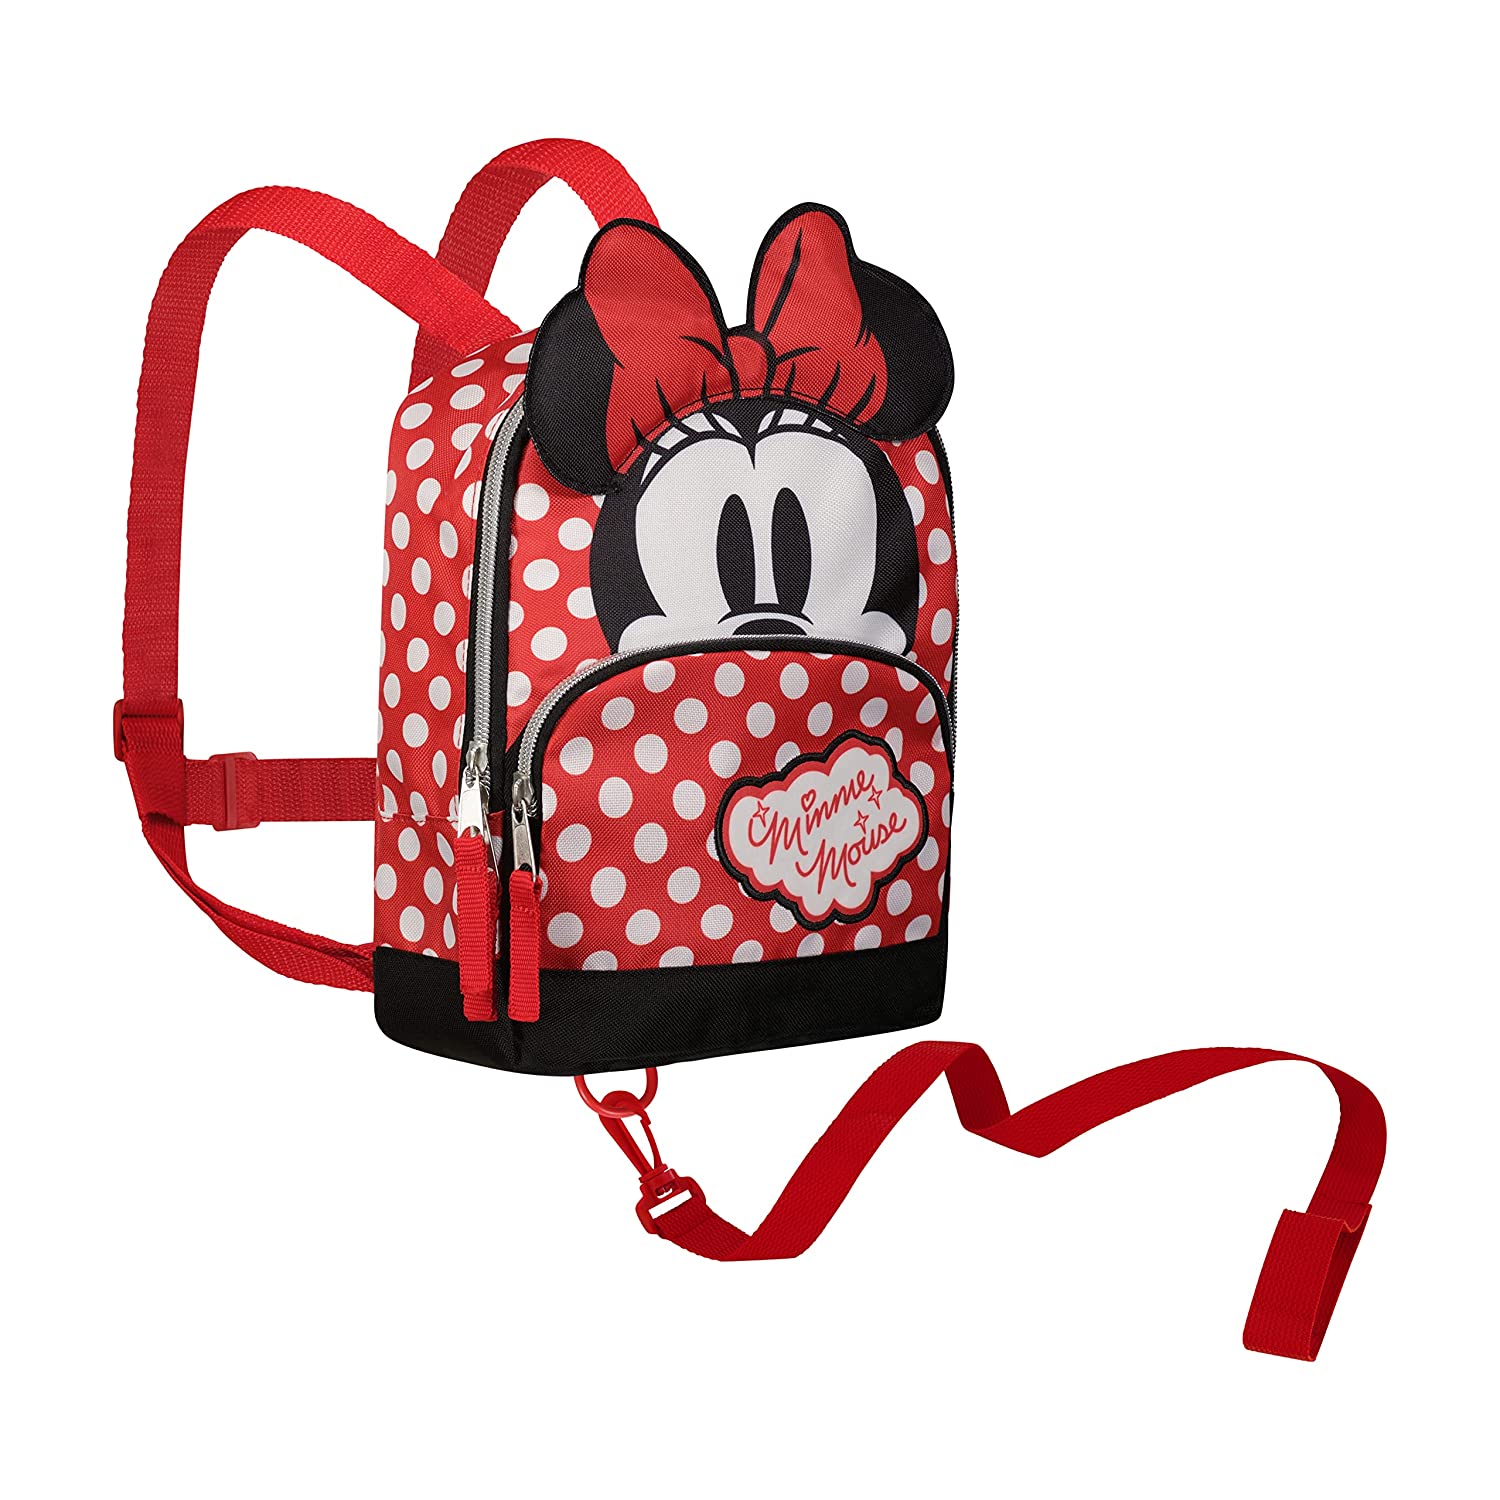 Disney Harness Backpack with Removable Tether – Travel Toddler Safety Backpack – Anti-Lost Kids’ Mini Backpack – Kids Baby Harness Backpack for Boys and Girls